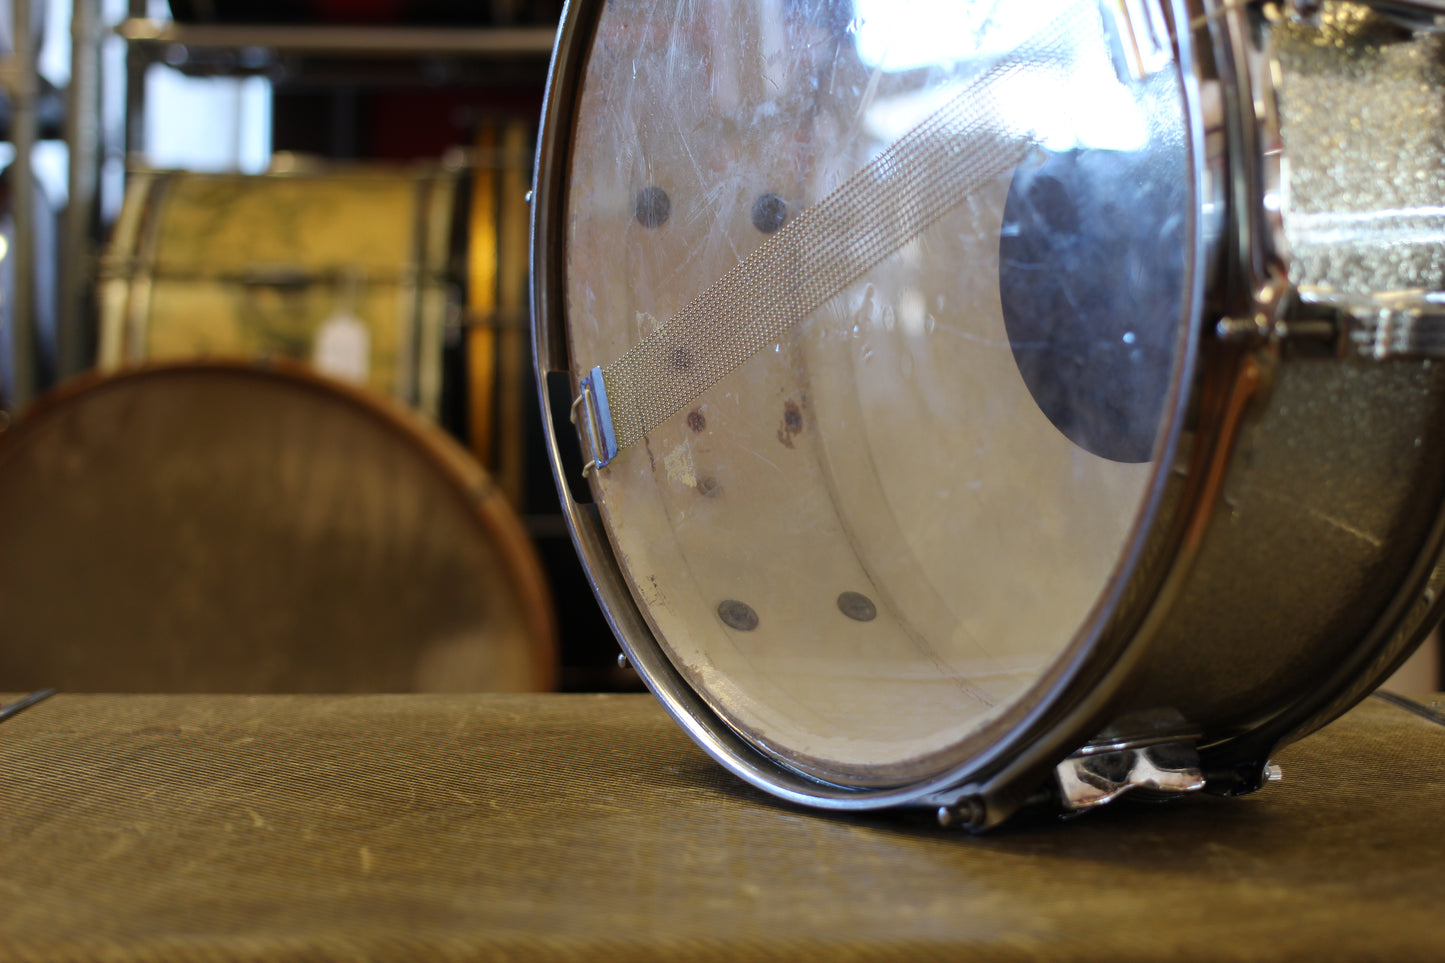 1966 Ludwig 5"x14" Pioneer Snare Drum in Silver Sparkle